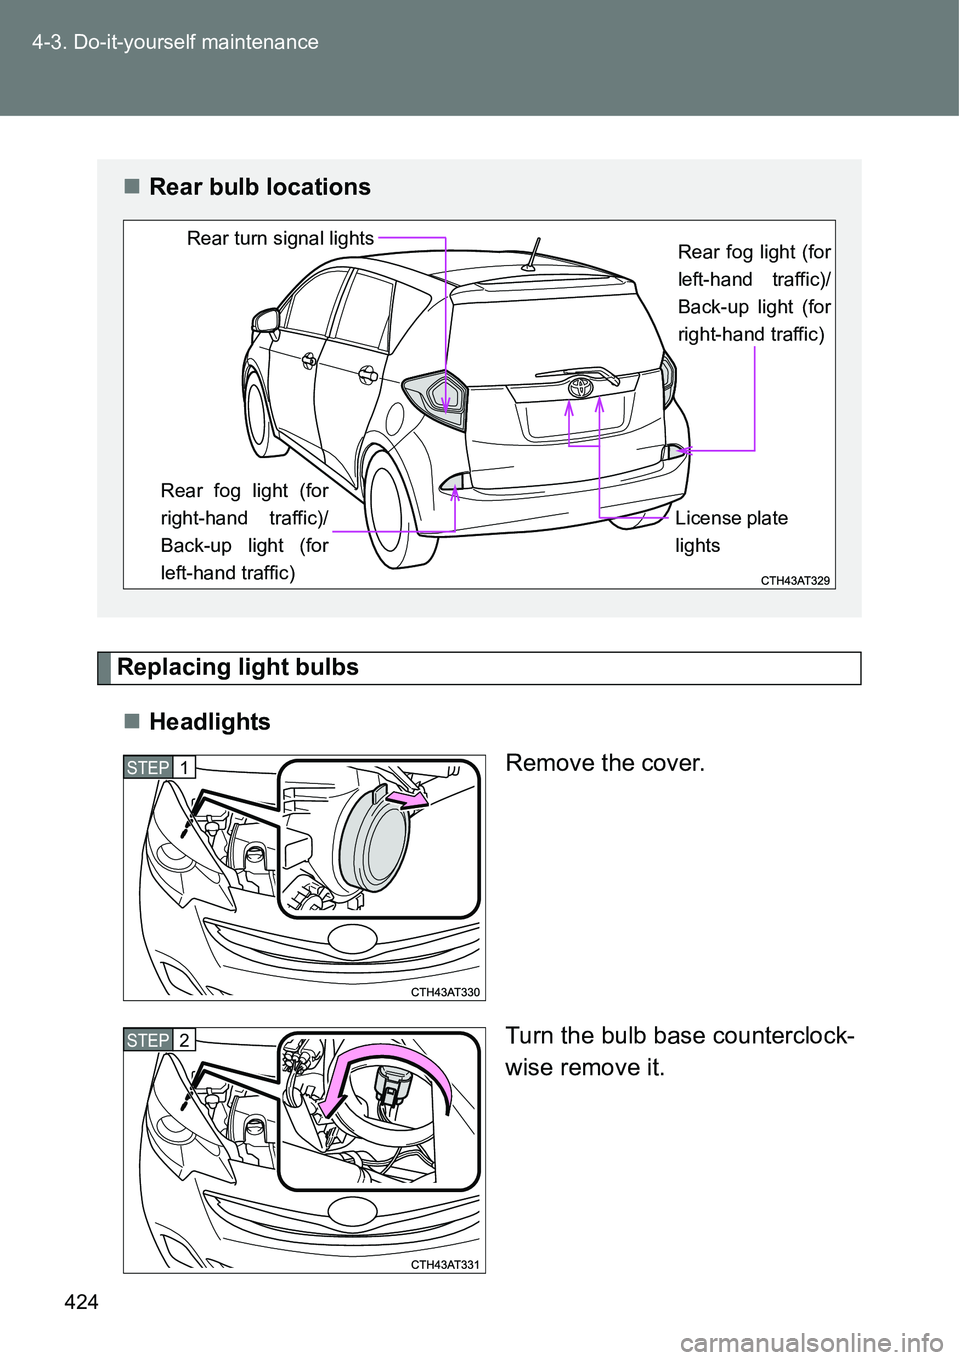 TOYOTA VERSO S 2015  Owners Manual 424 4-3. Do-it-yourself maintenance
Replacing light bulbs
Headlights
Remove the cover.
Turn the bulb base counterclock-
wise remove it.
Rear bulb locations
Rear fog light (for
left-hand traffic)